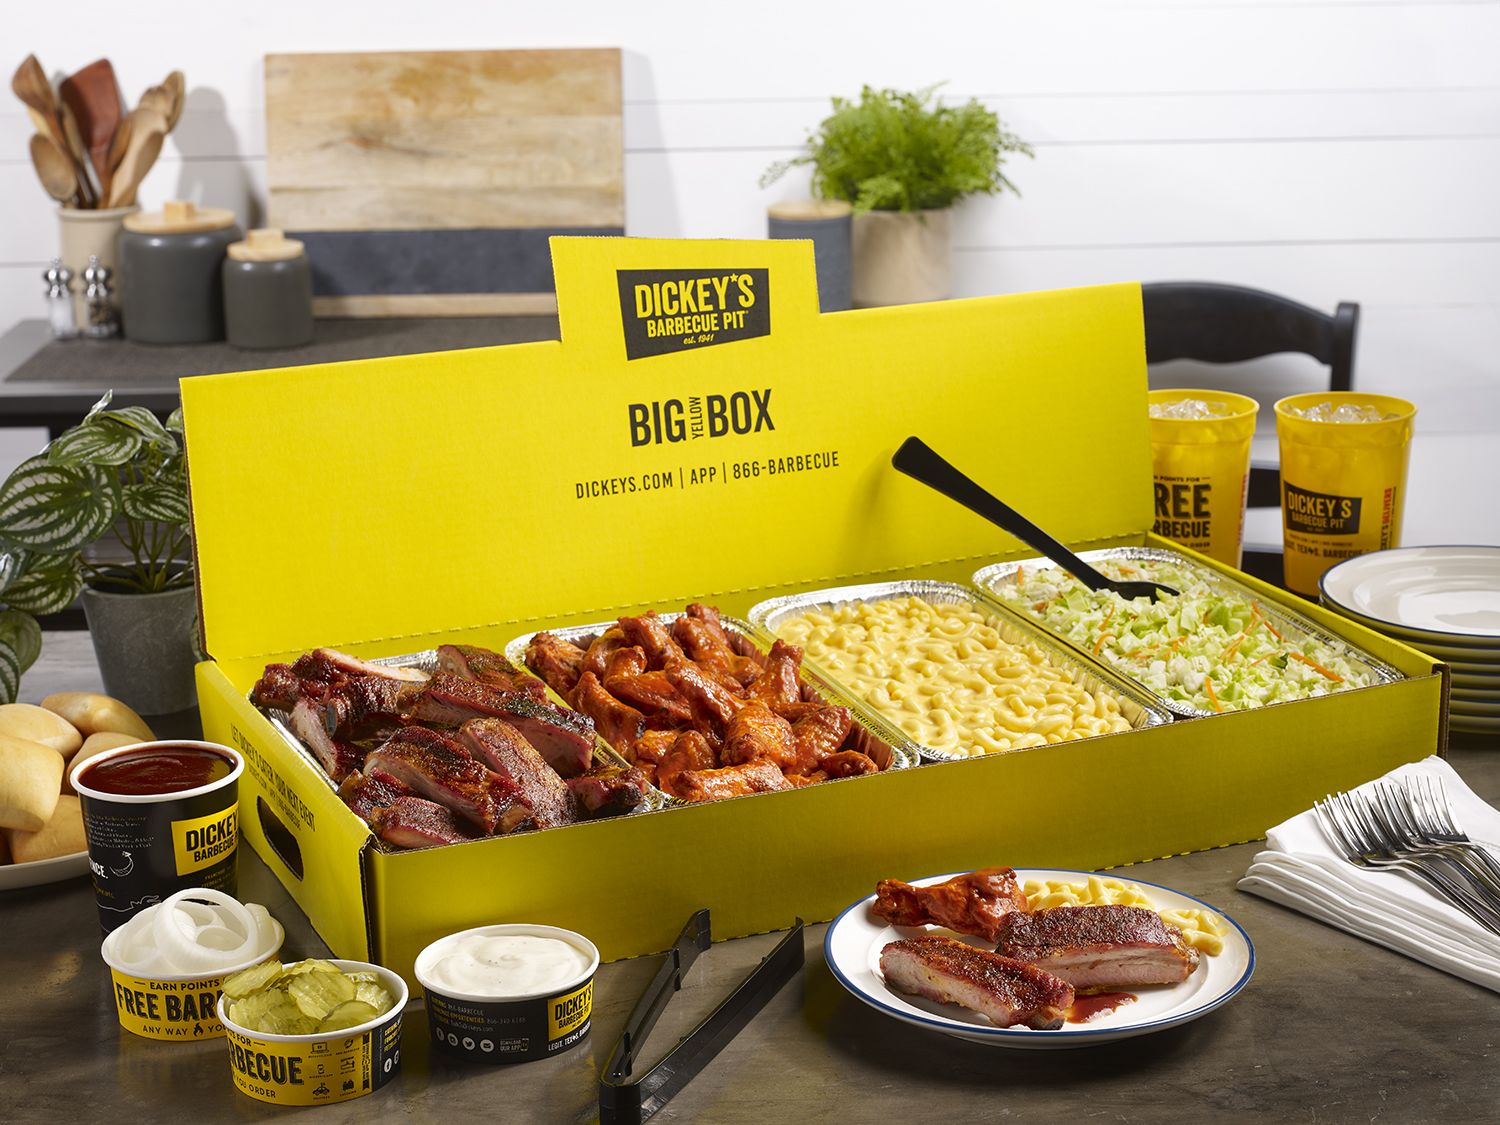 Enjoy a Football Feast with Dickey's Barbecue Pit